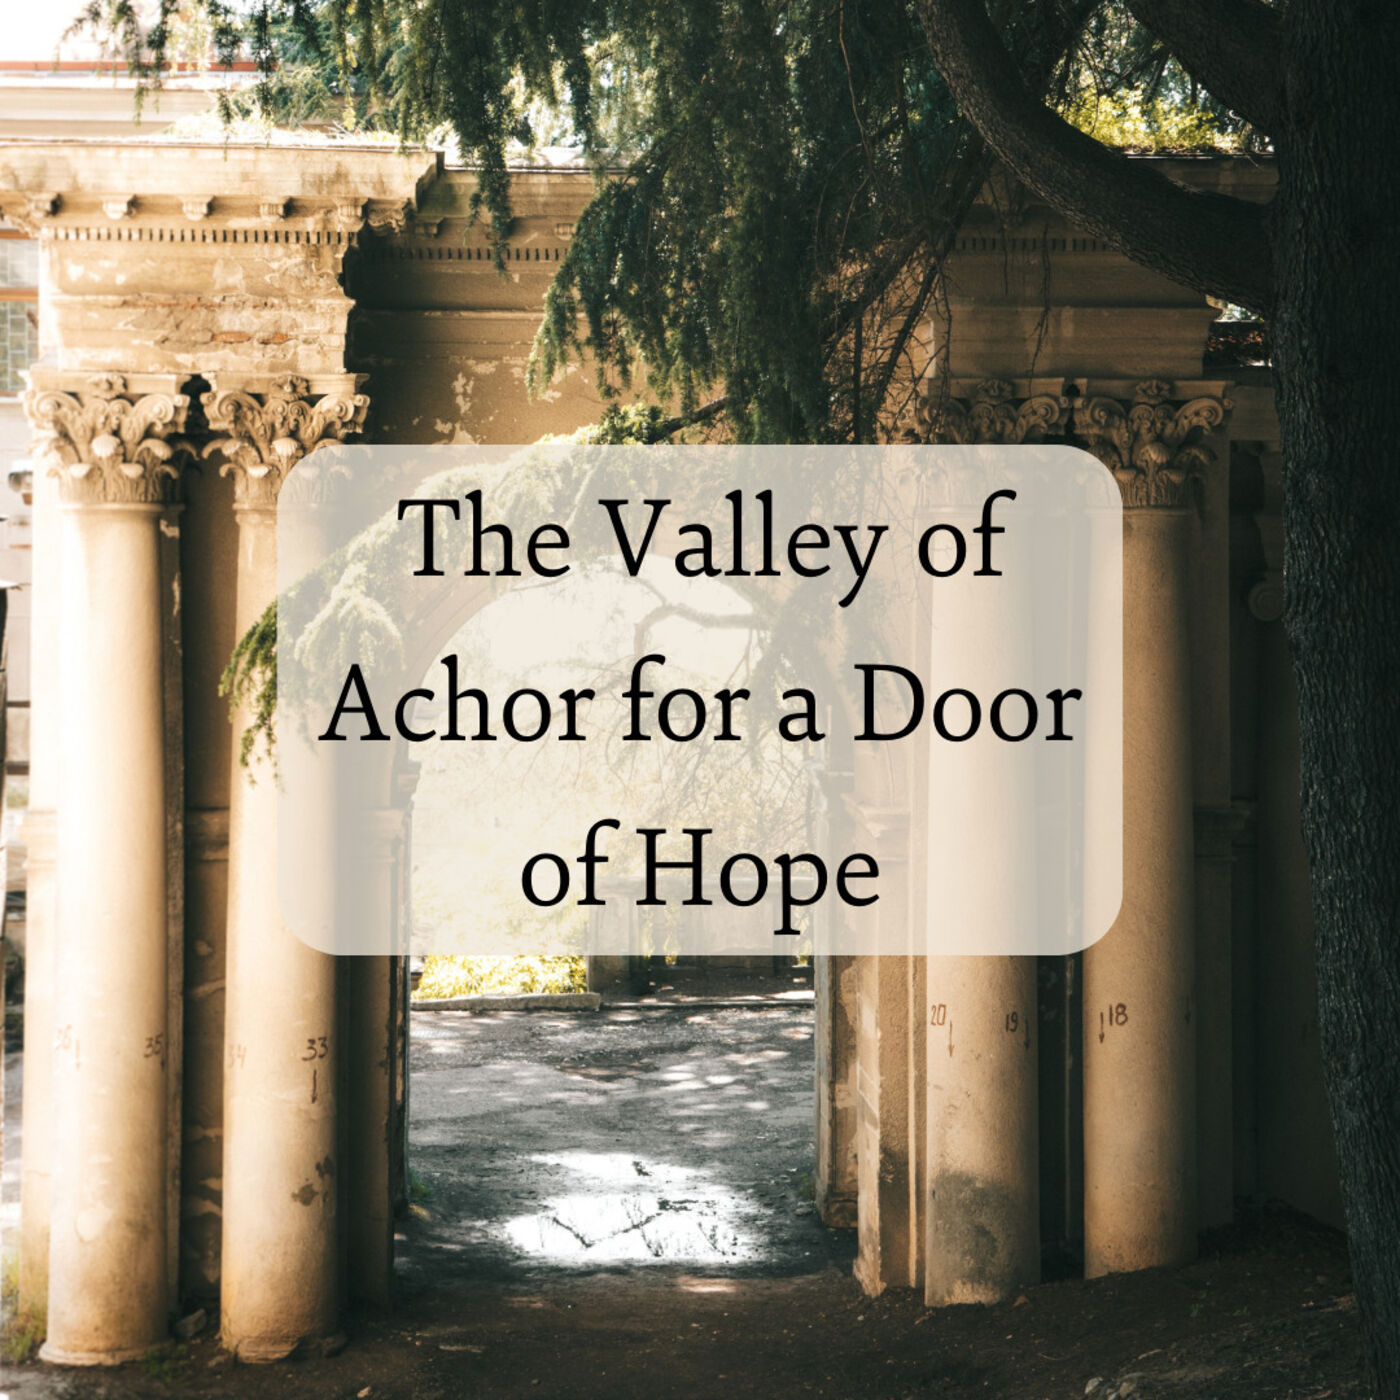 The Valley of Achor for a Door of Hope